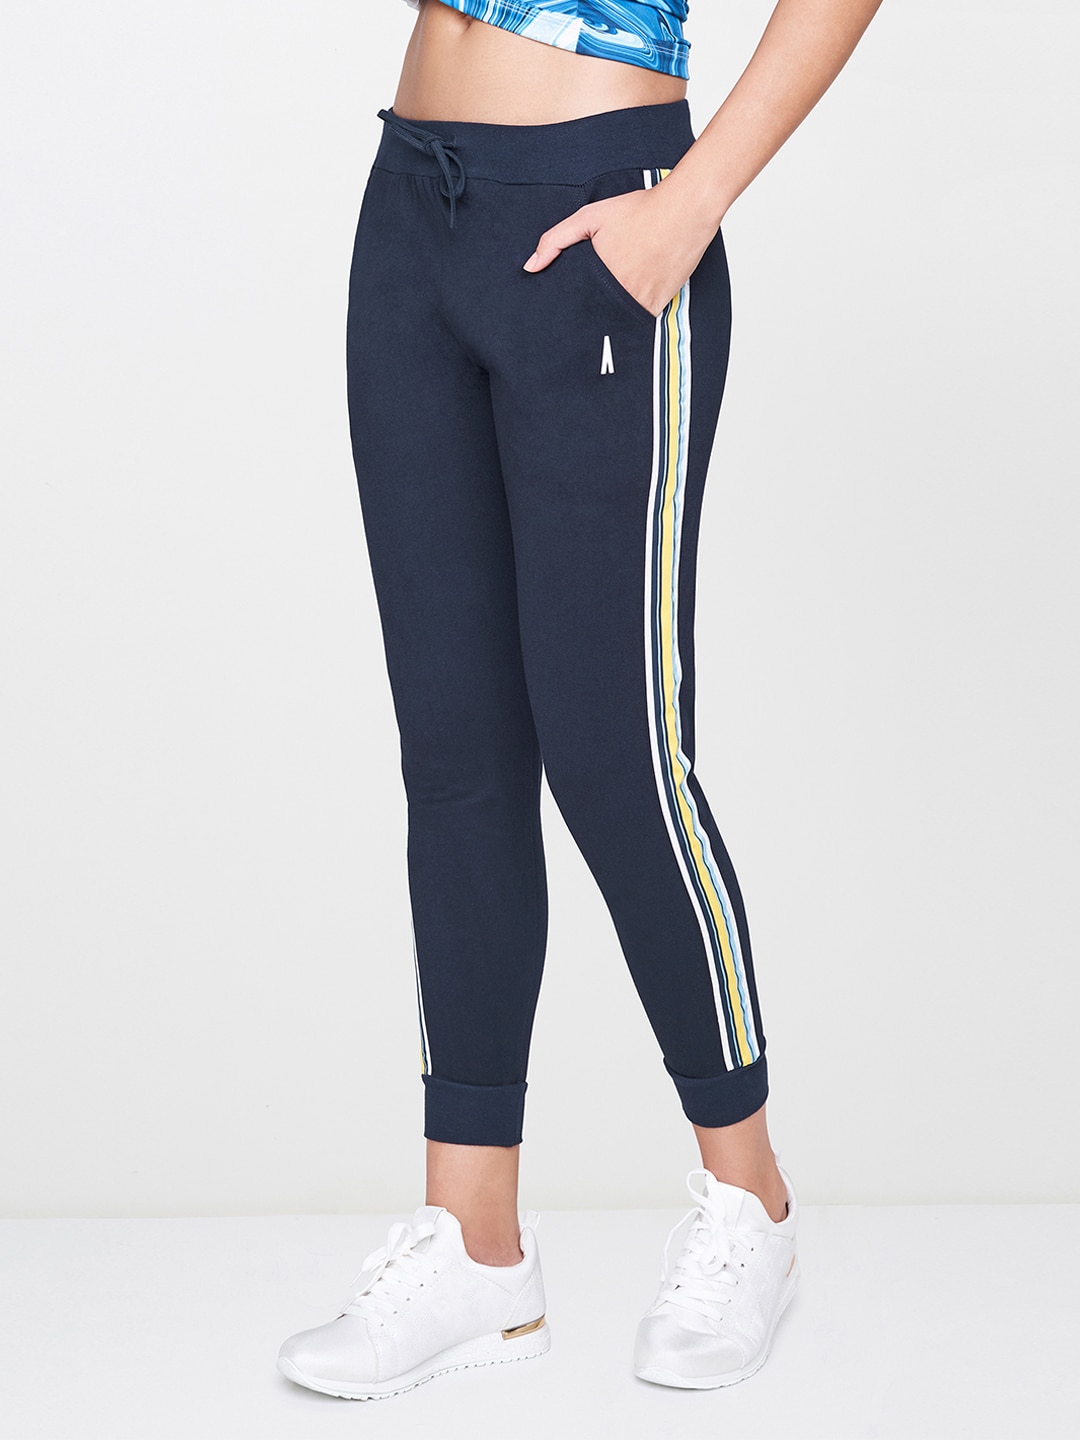 AND Women Navy Blue Regular Fit Solid Cropped Activewear Joggers Price in India